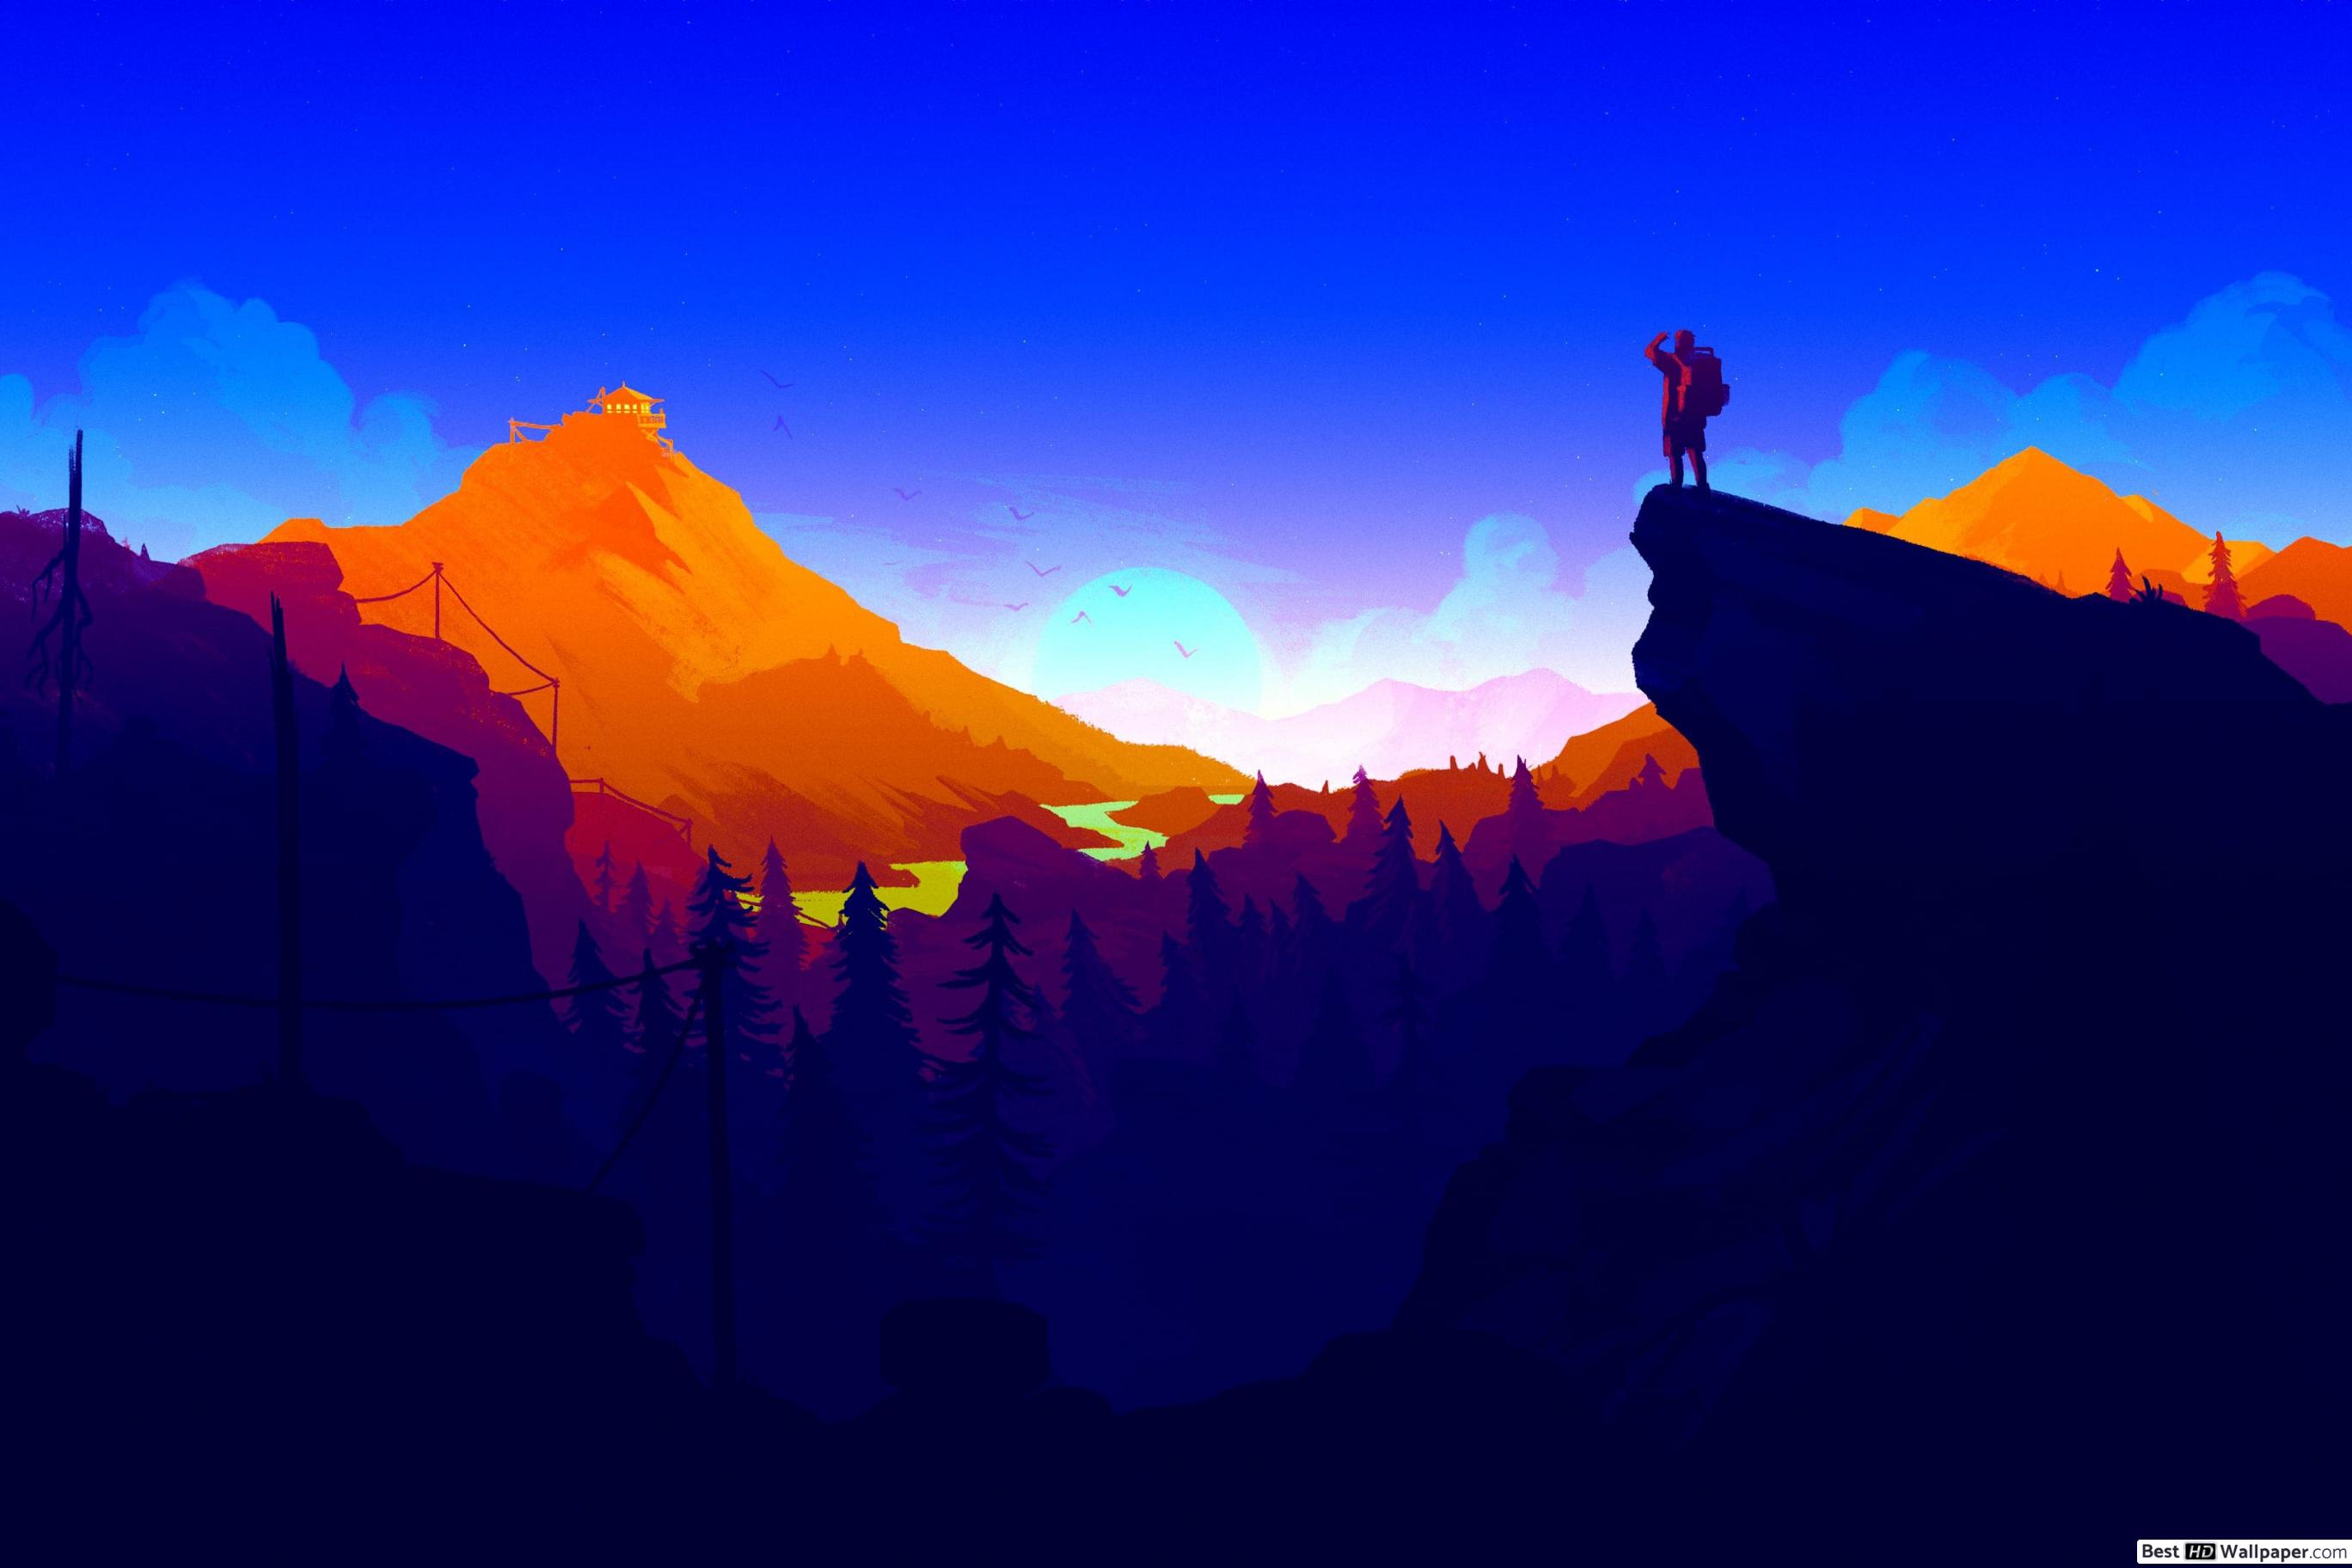 Firewatch (video game) in Mountains HD wallpaper download